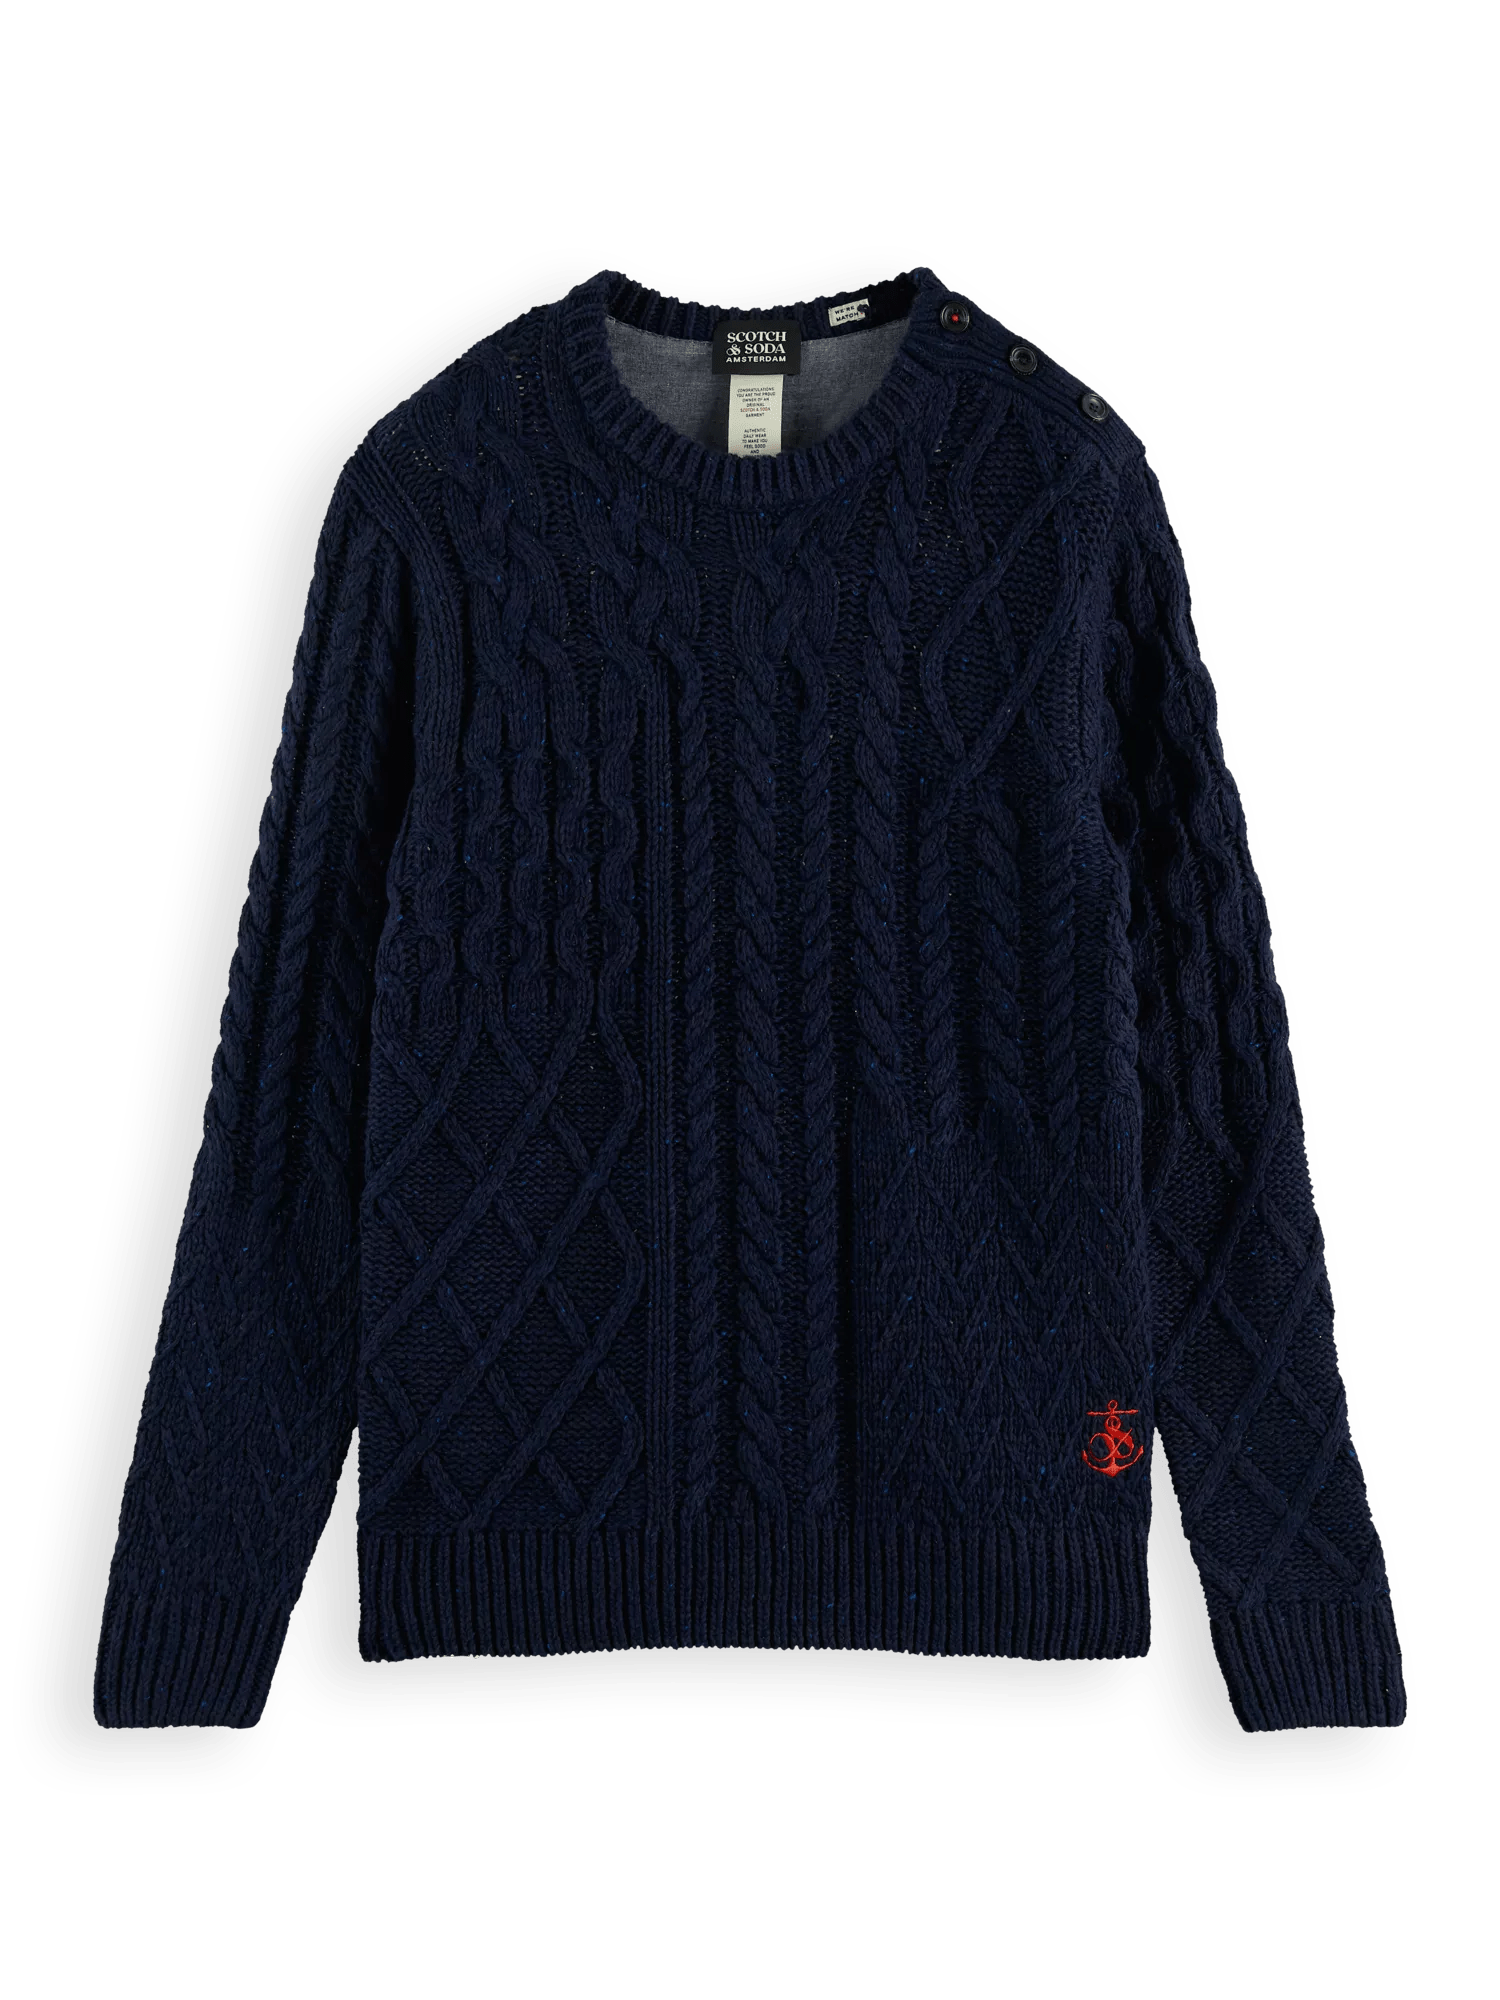 Scotch & Soda Speckled cable knit crewneck sweater FNT